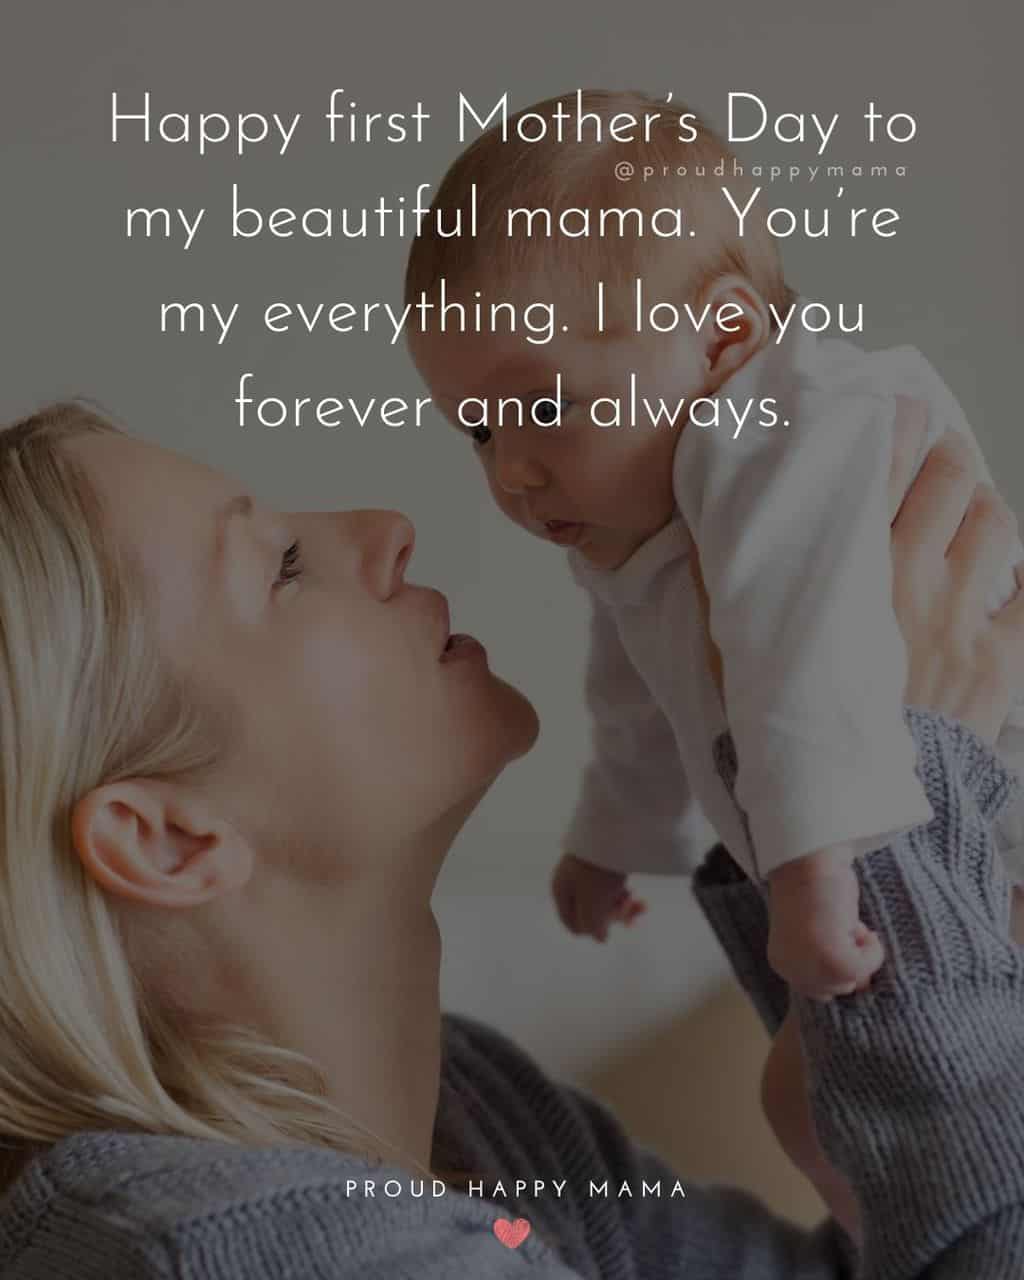 First Mothers Day Quotes - Happy first Mother’s Day to my beautiful mama. You’re my everything. I love you forever and always.’